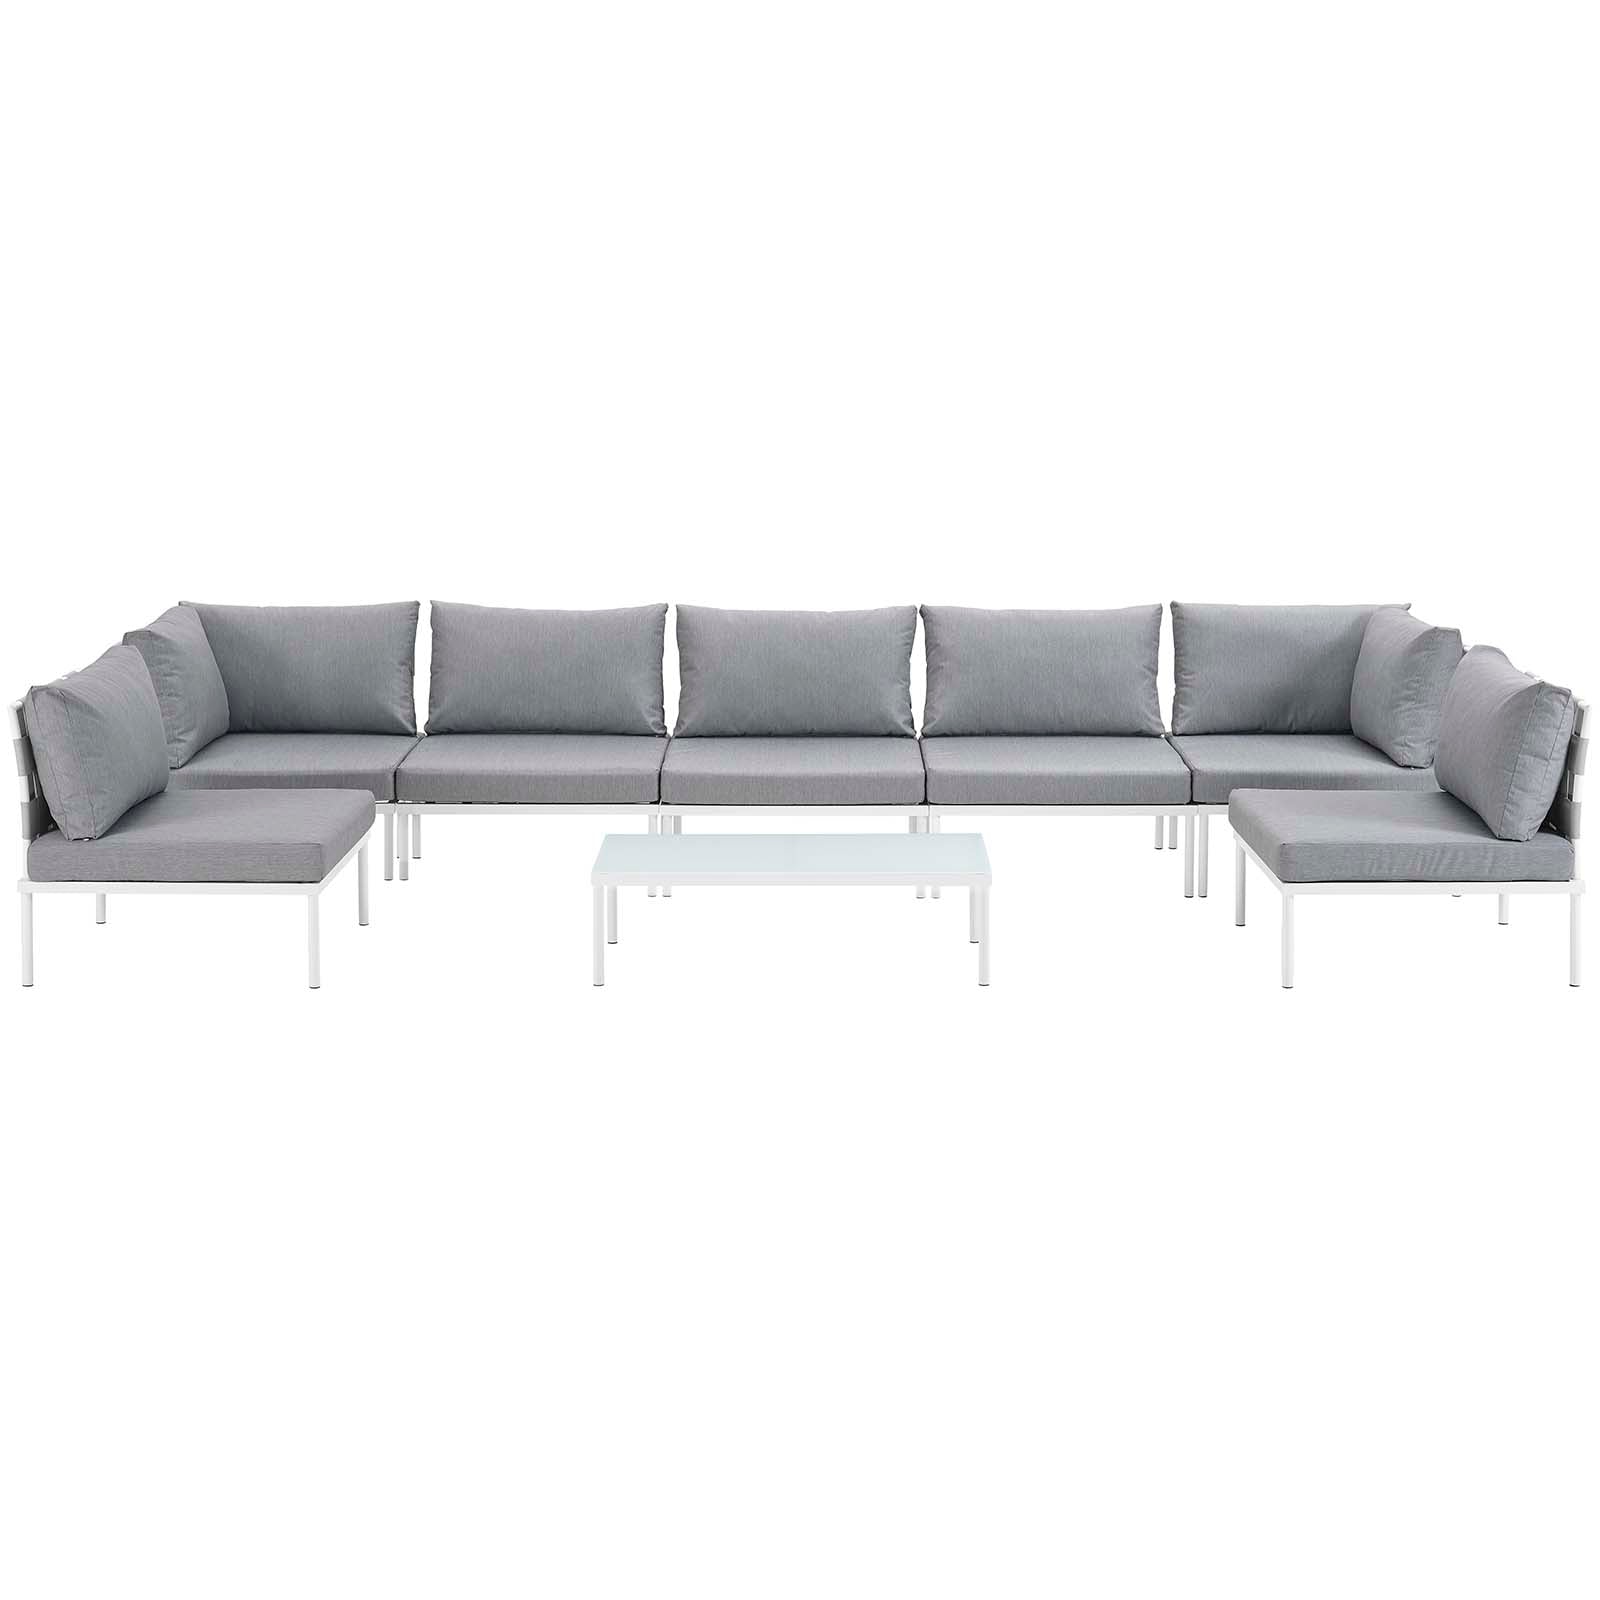 Modway Outdoor Conversation Sets - Harmony 8 Piece Outdoor Patio Sectional Sofa Set White Gray